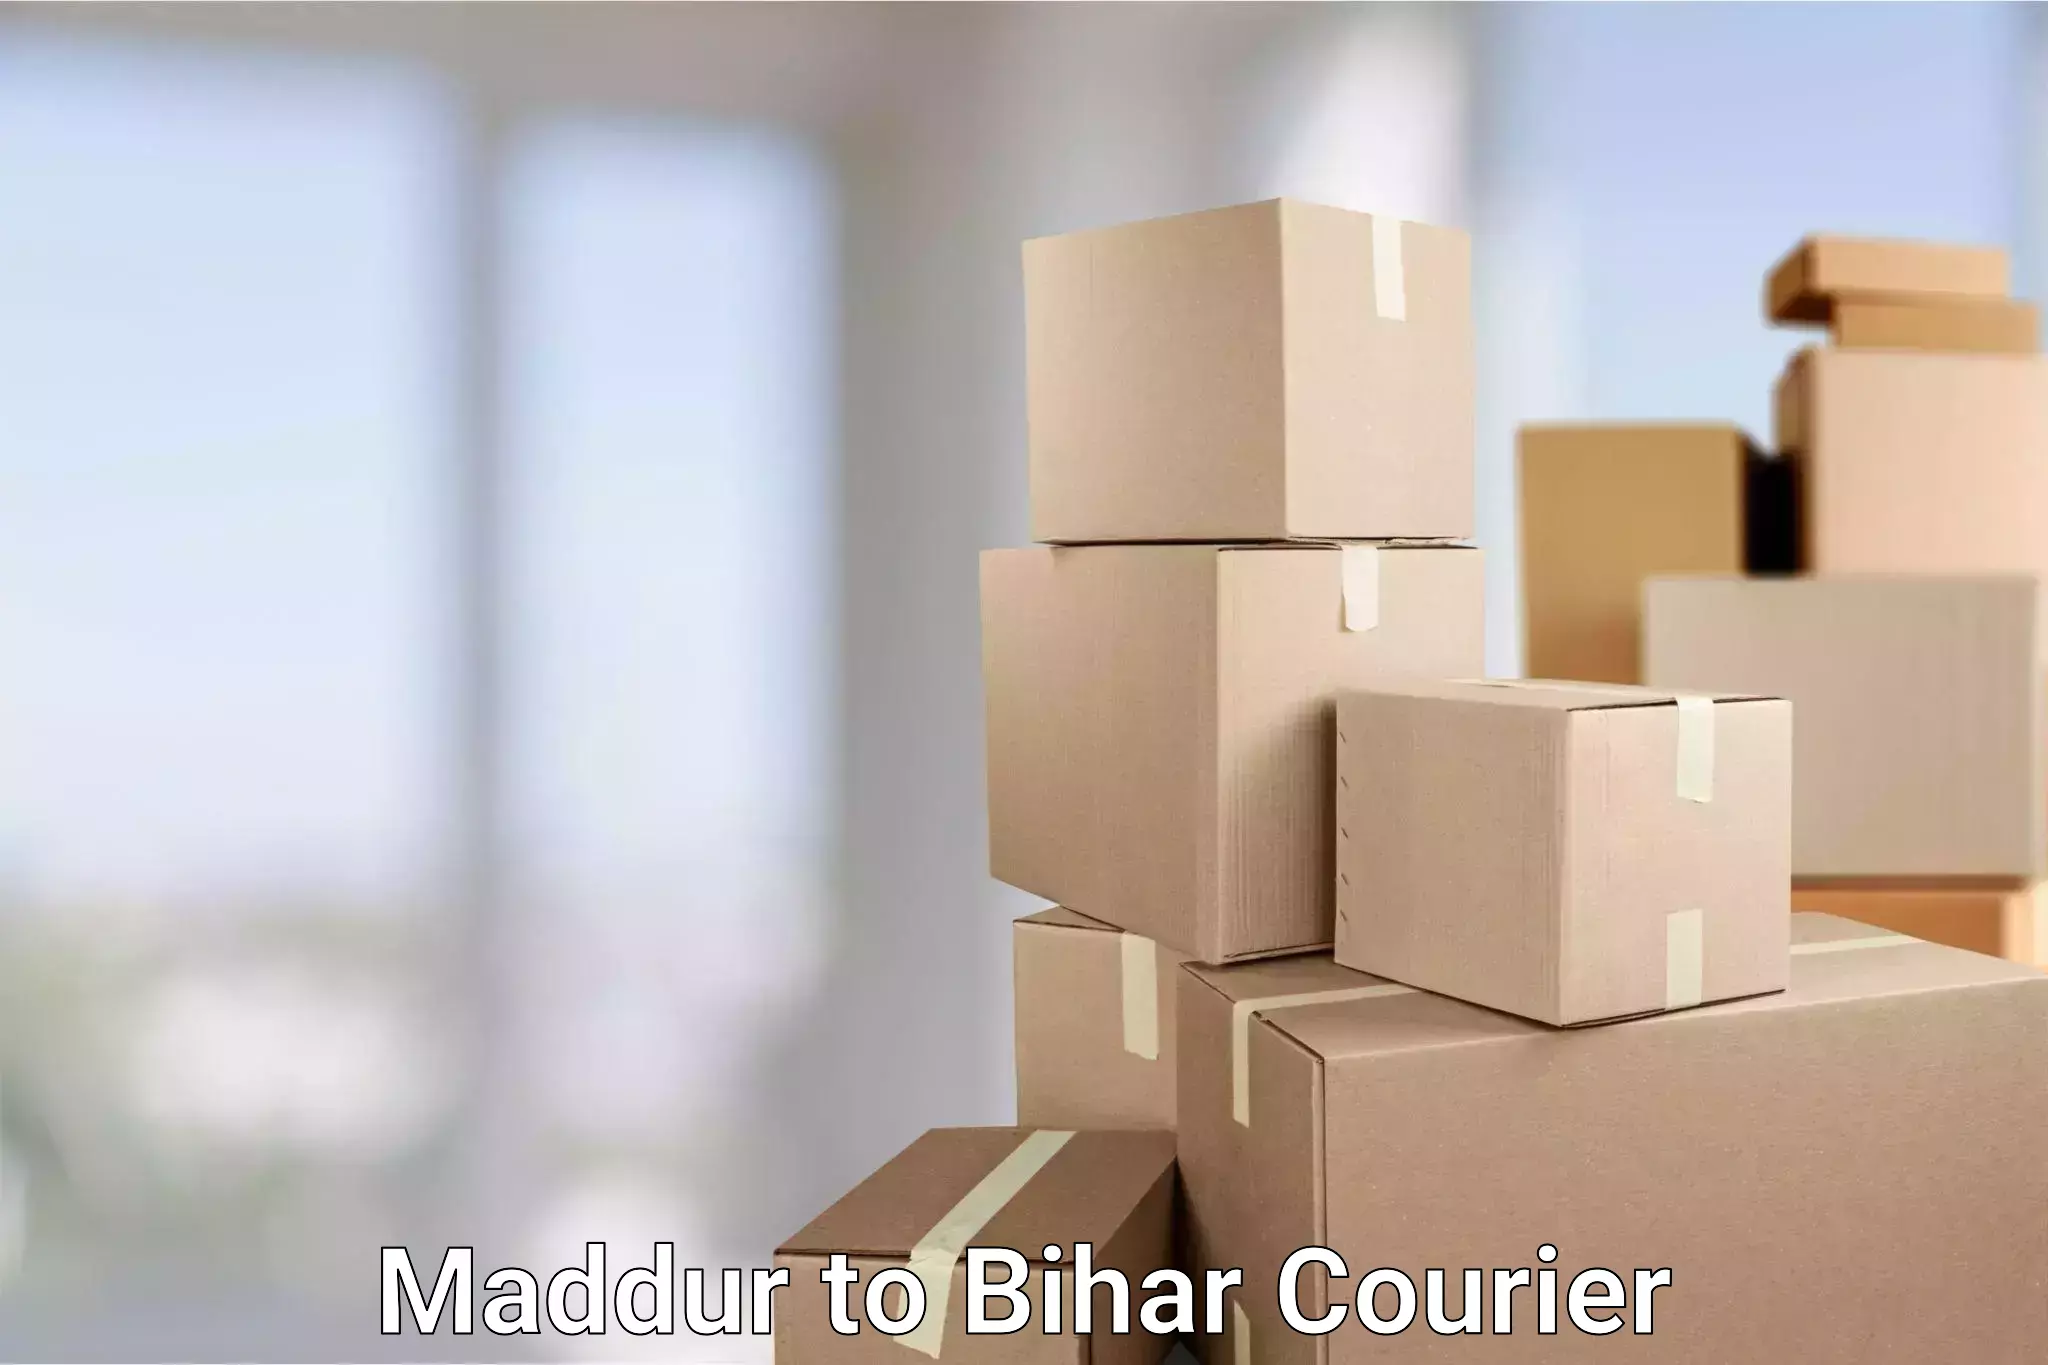 Courier service booking in Maddur to Naugachhia